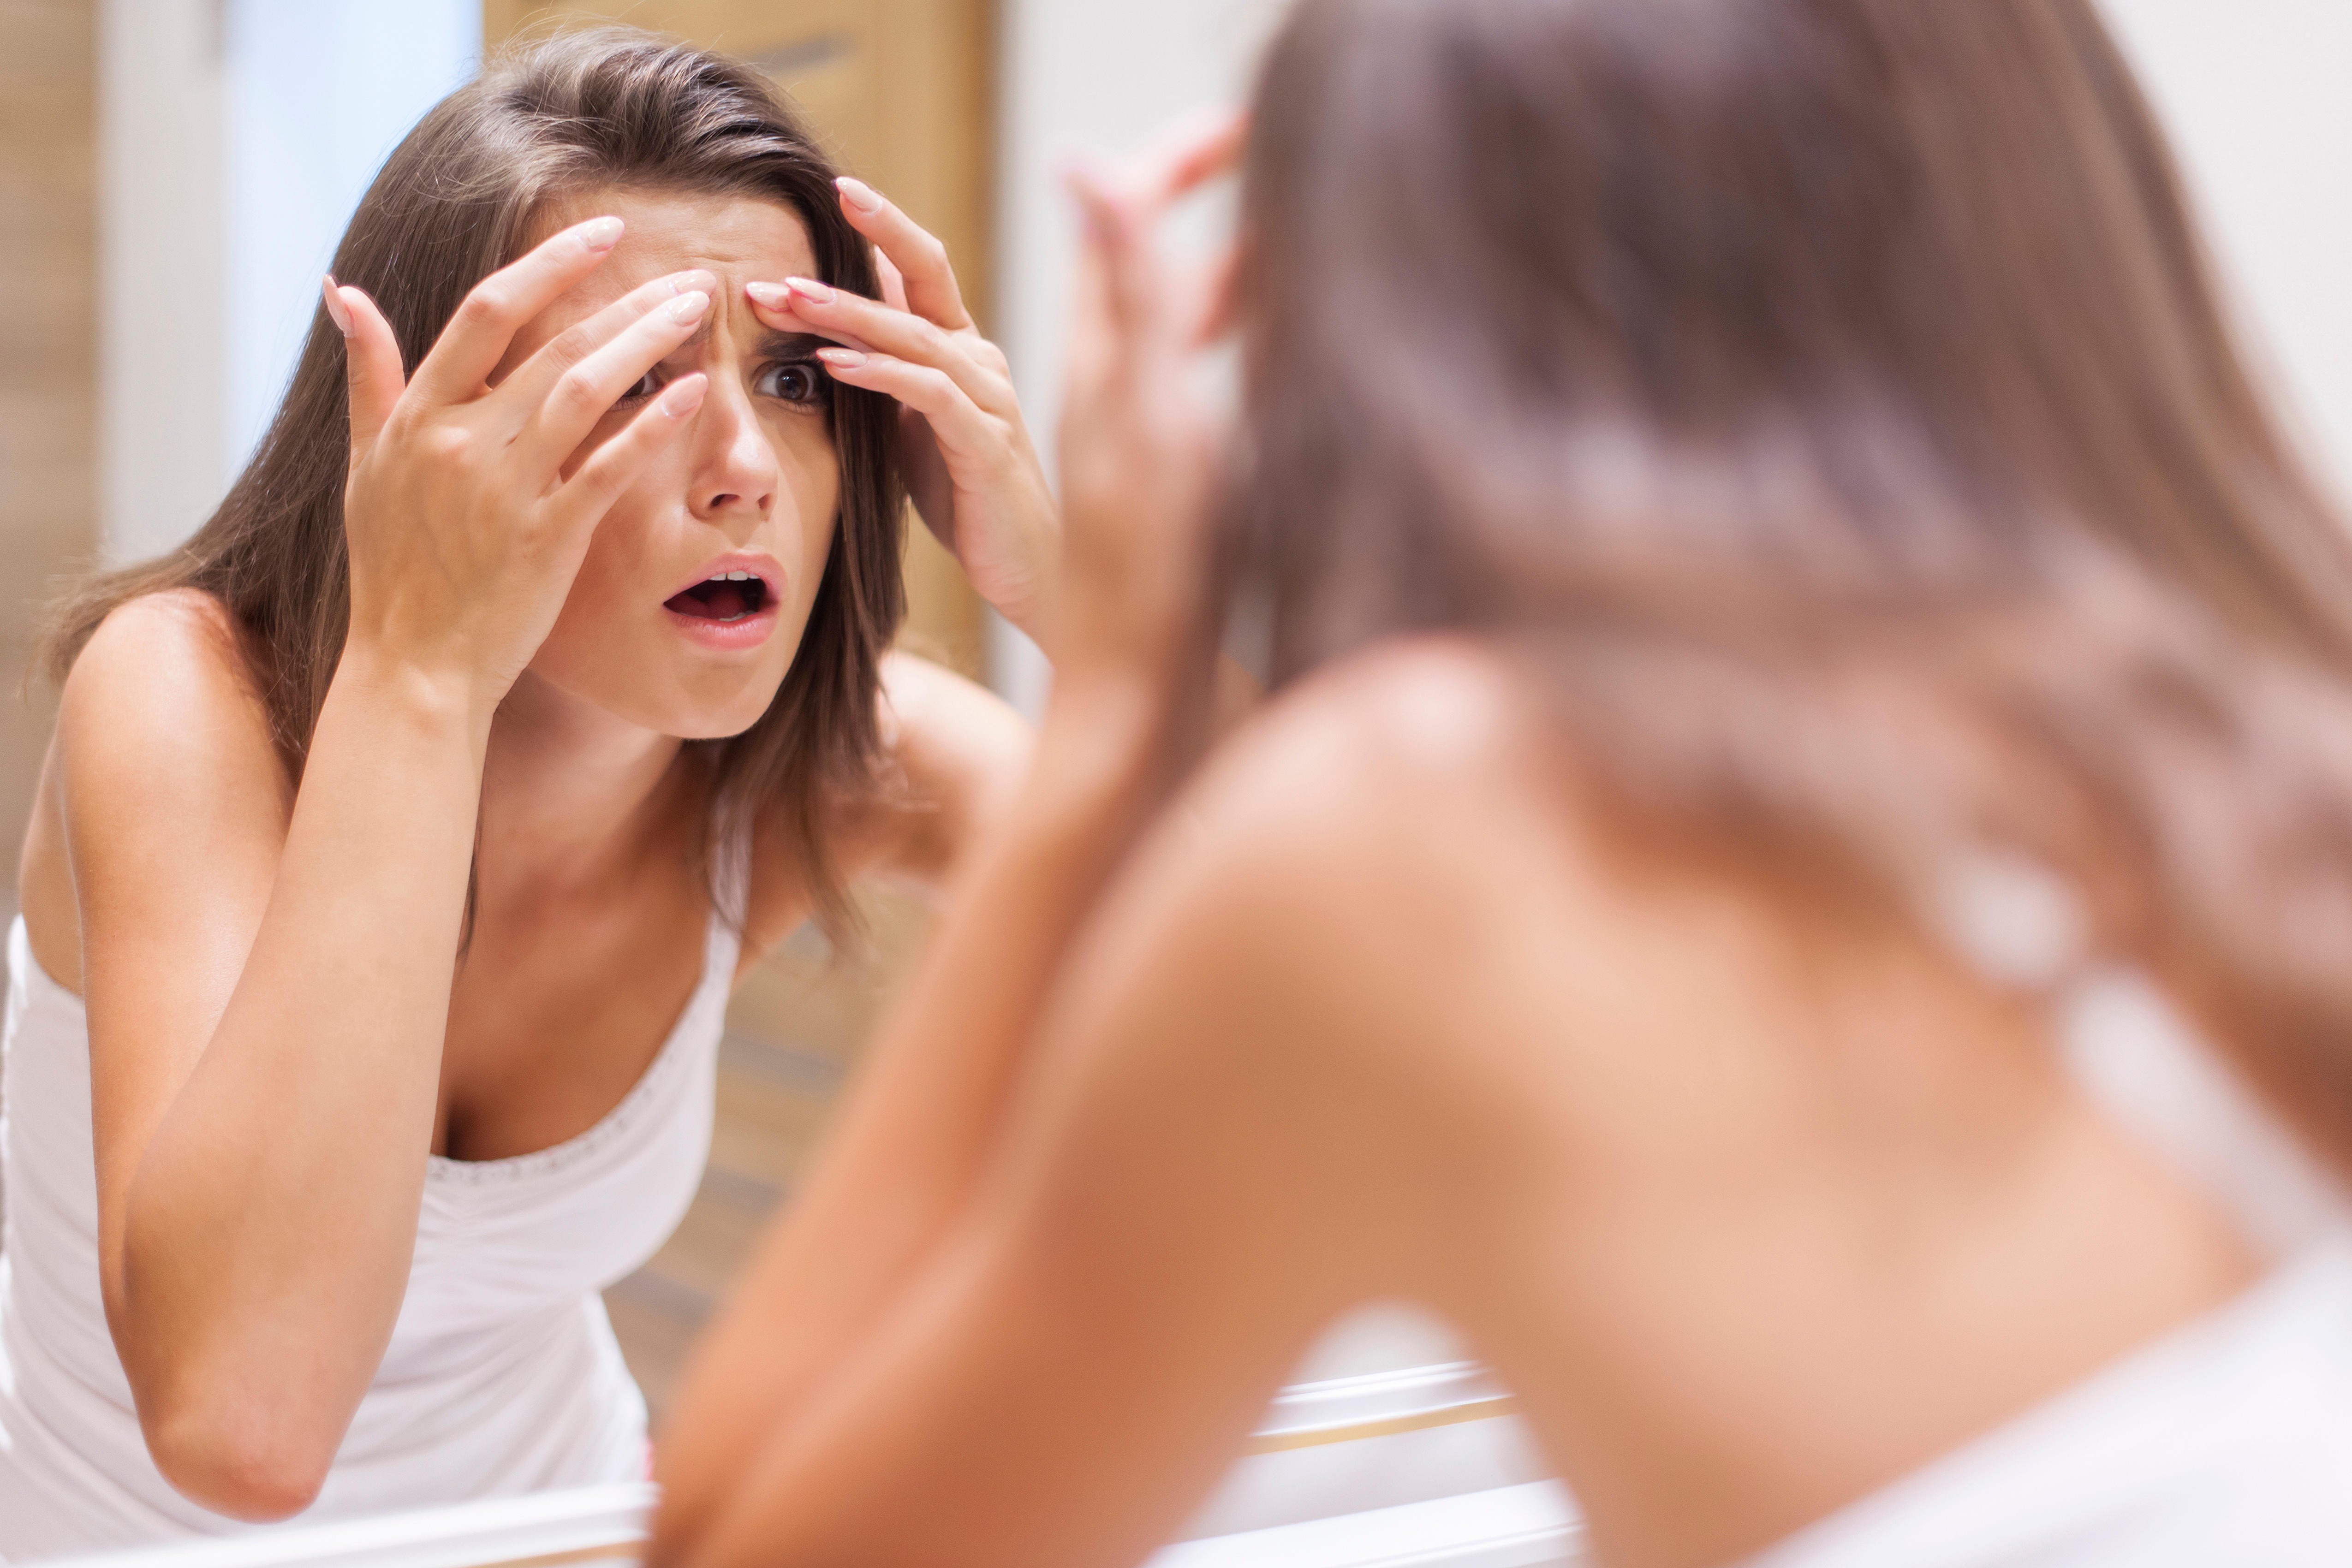 Don’t pop those pimples! A skincare expert shares tips on healthy skin. Photo: Alamy